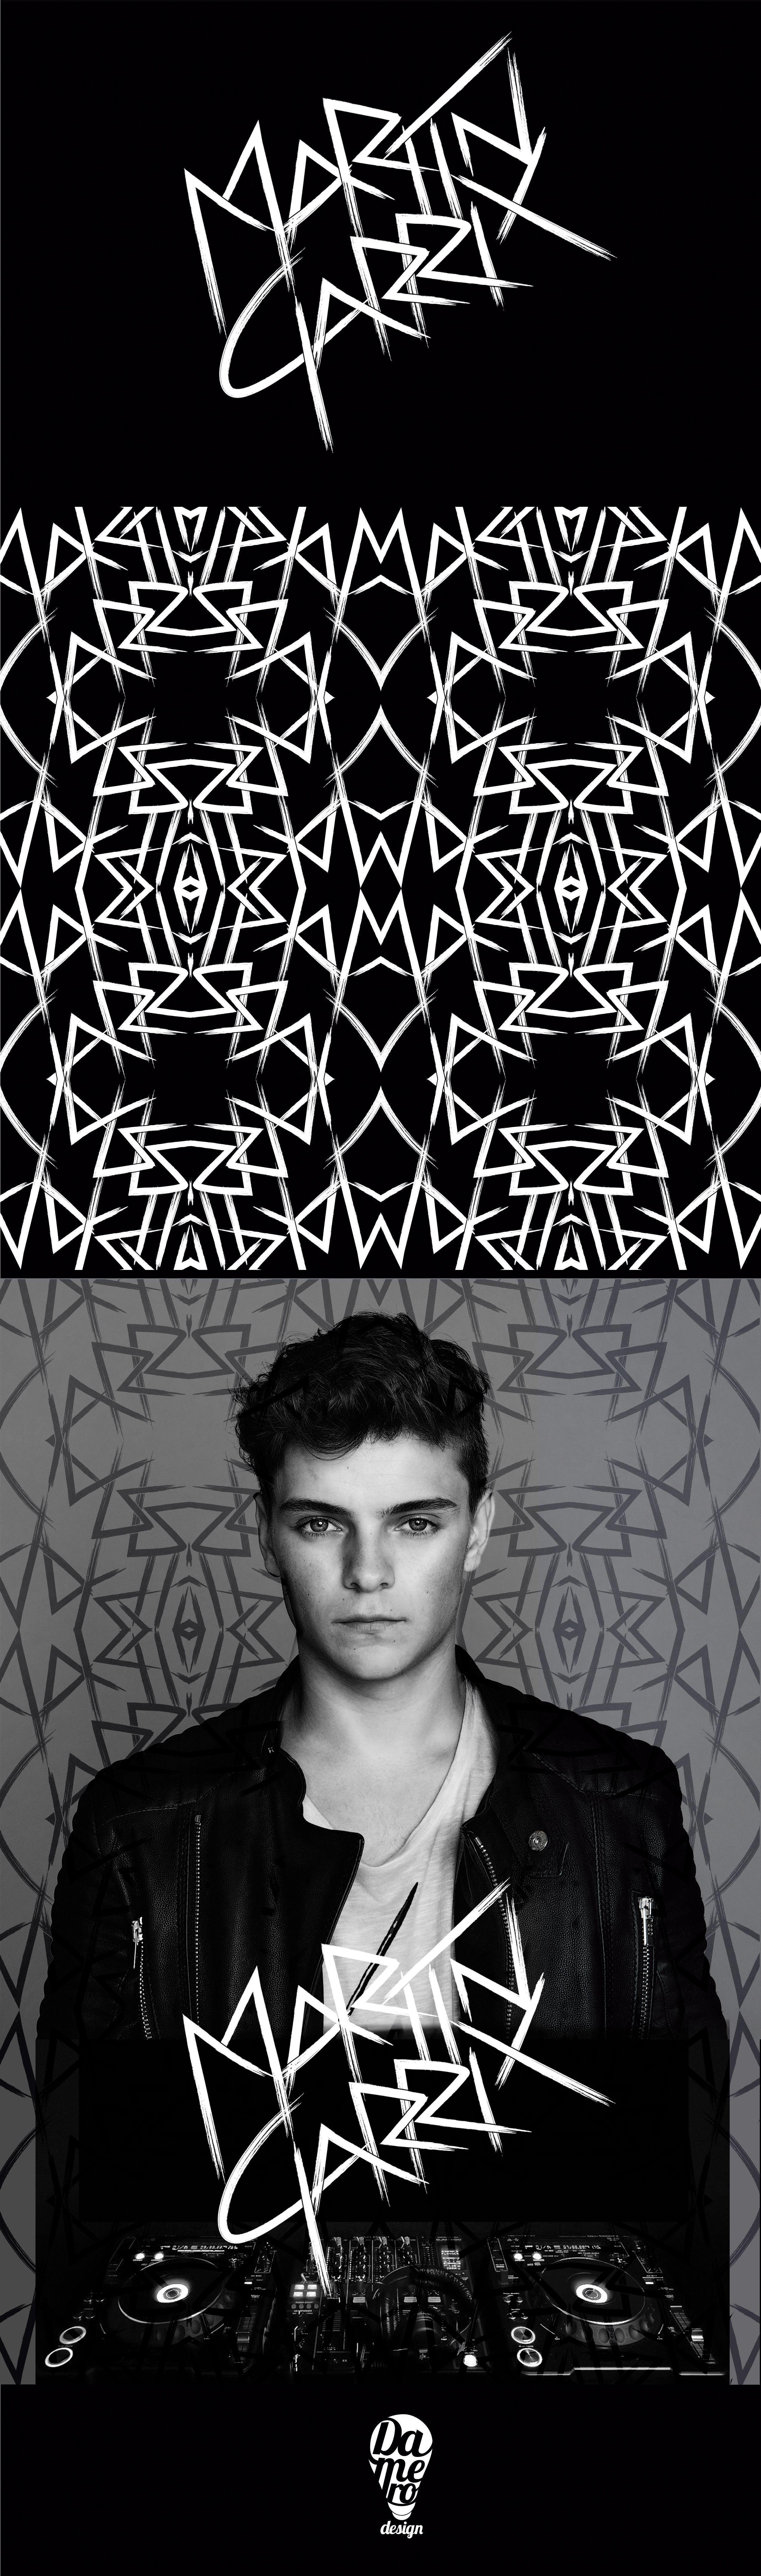 New Martin Garrix's logo and pattern application by #damerodesign